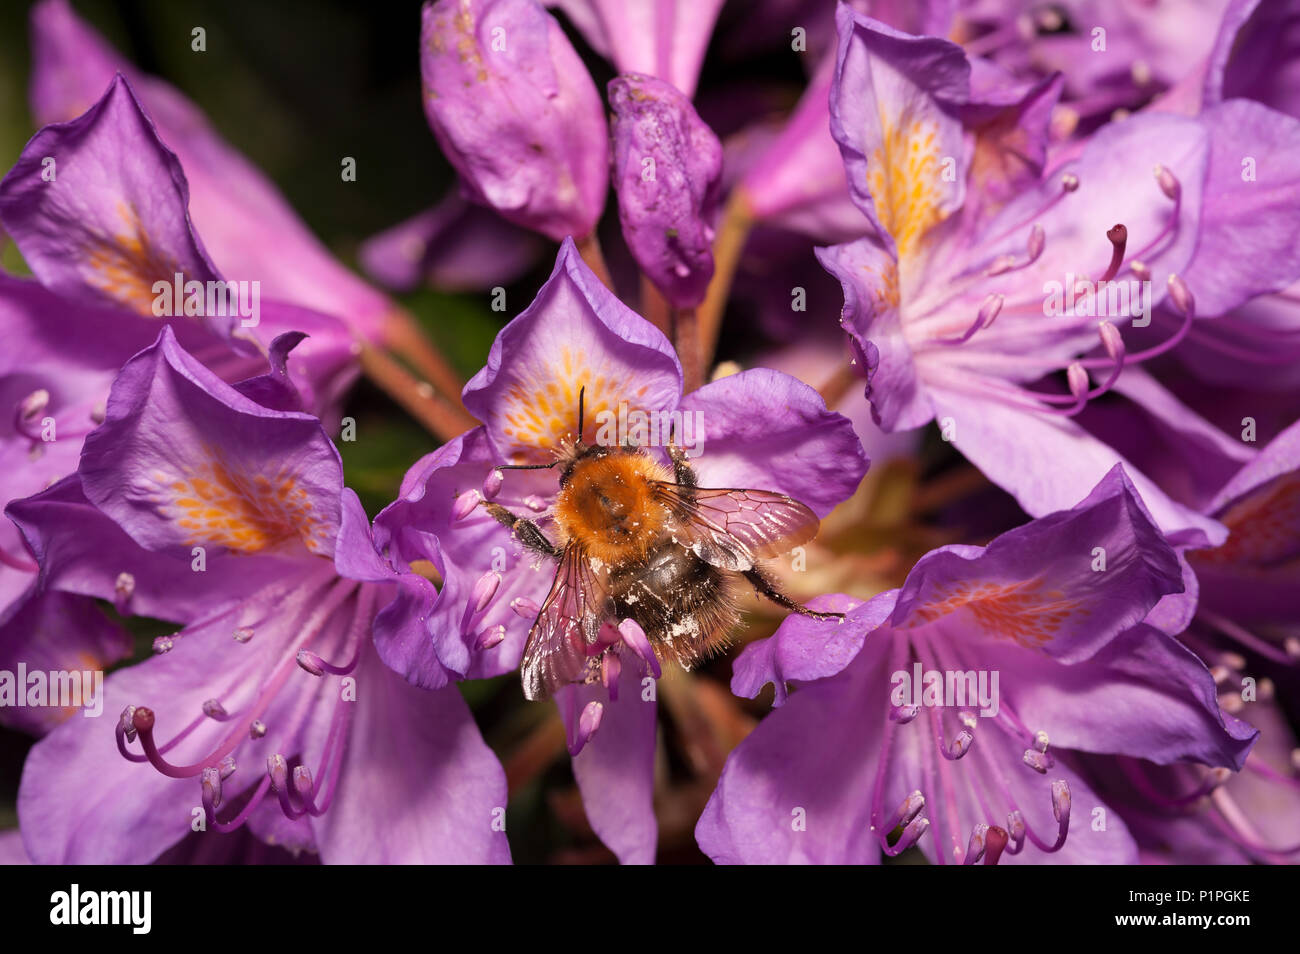 A feeding frenzy feeding on wild Rhododendron flowers has left bumblebees coated in pollen all over adhering to fine hairs on body Bombus pascuorum Stock Photo